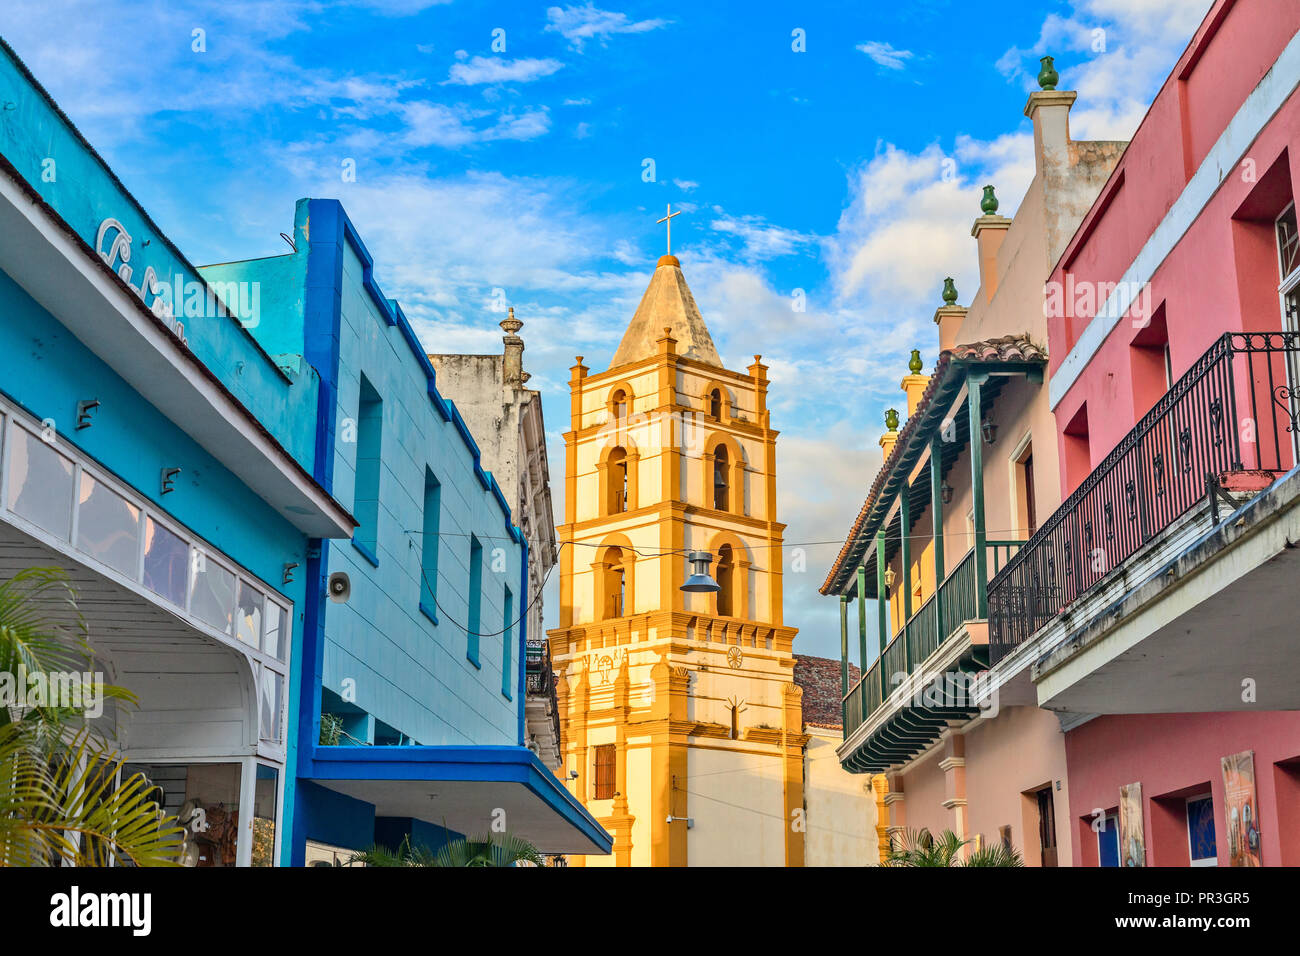 Nuestra Senora de la Soledad church and Spanish colonial colorful decorated houses with balconies, in the center of Camaguey, Cuba Stock Photo